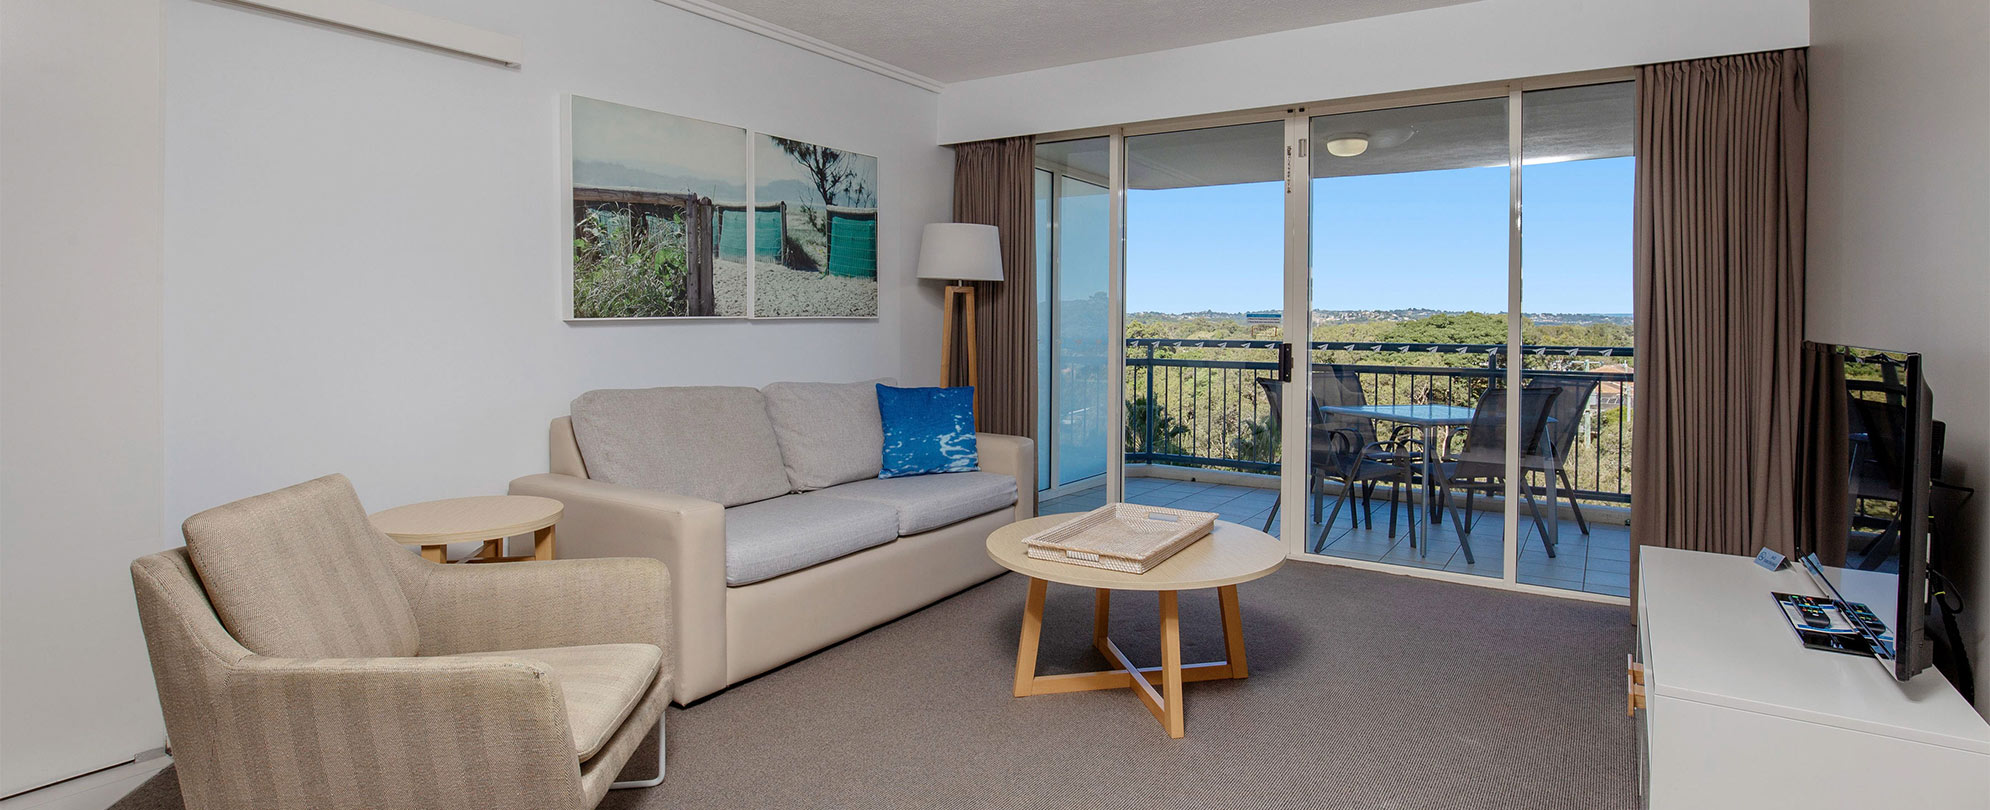 The living area of a Club Wyndham Kirra Beach ADA suite, with a couch, chair, flat screen tv, and sliding door to a balcony.